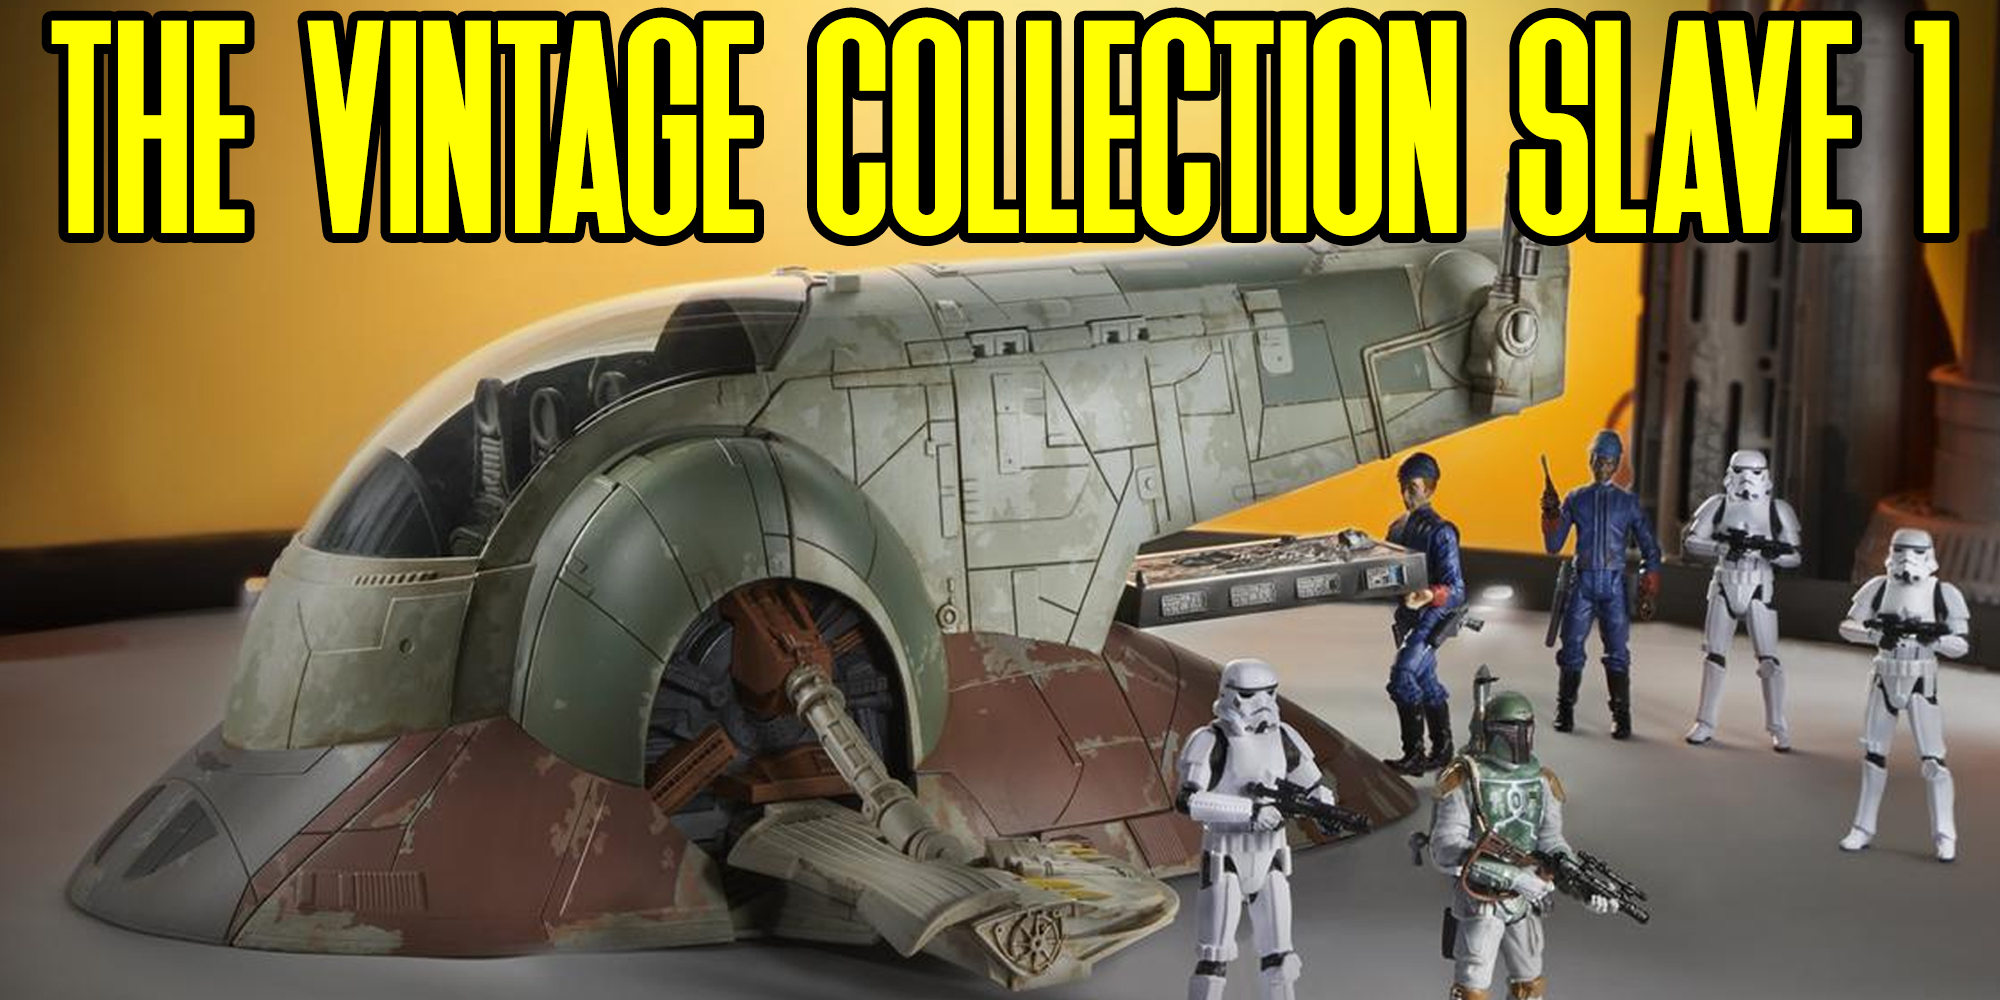 It's Time To Add The Vintage Collection Slave 1 To Your Collection!